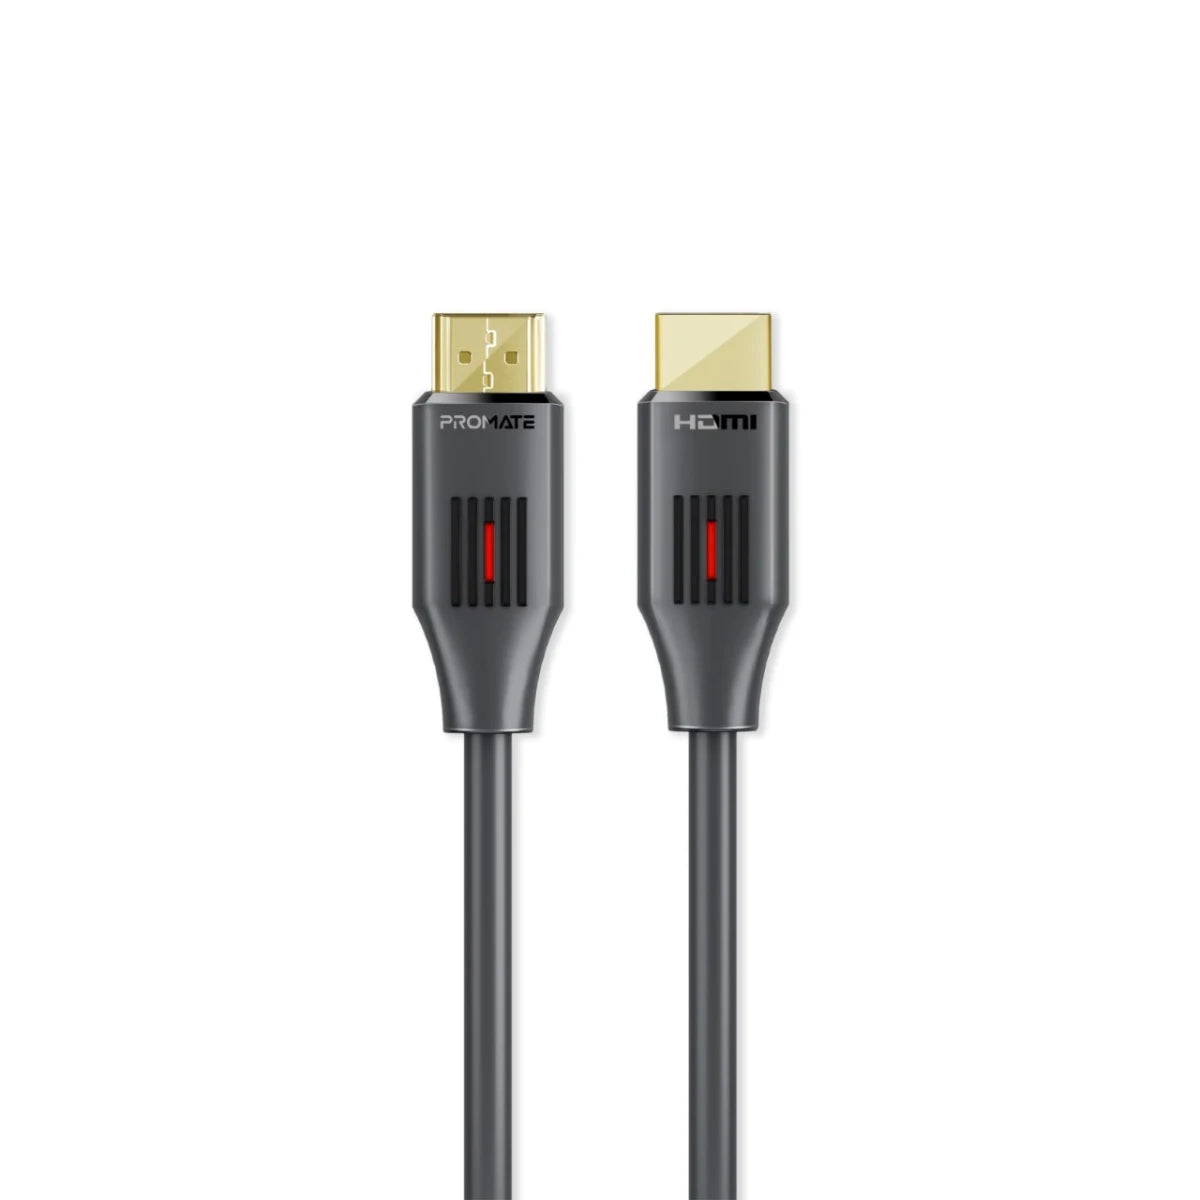 Promate ProLink4K60-150 HDMI Slim Cable 1.5m with 3D Support, 18Gbps, Ethernet Support